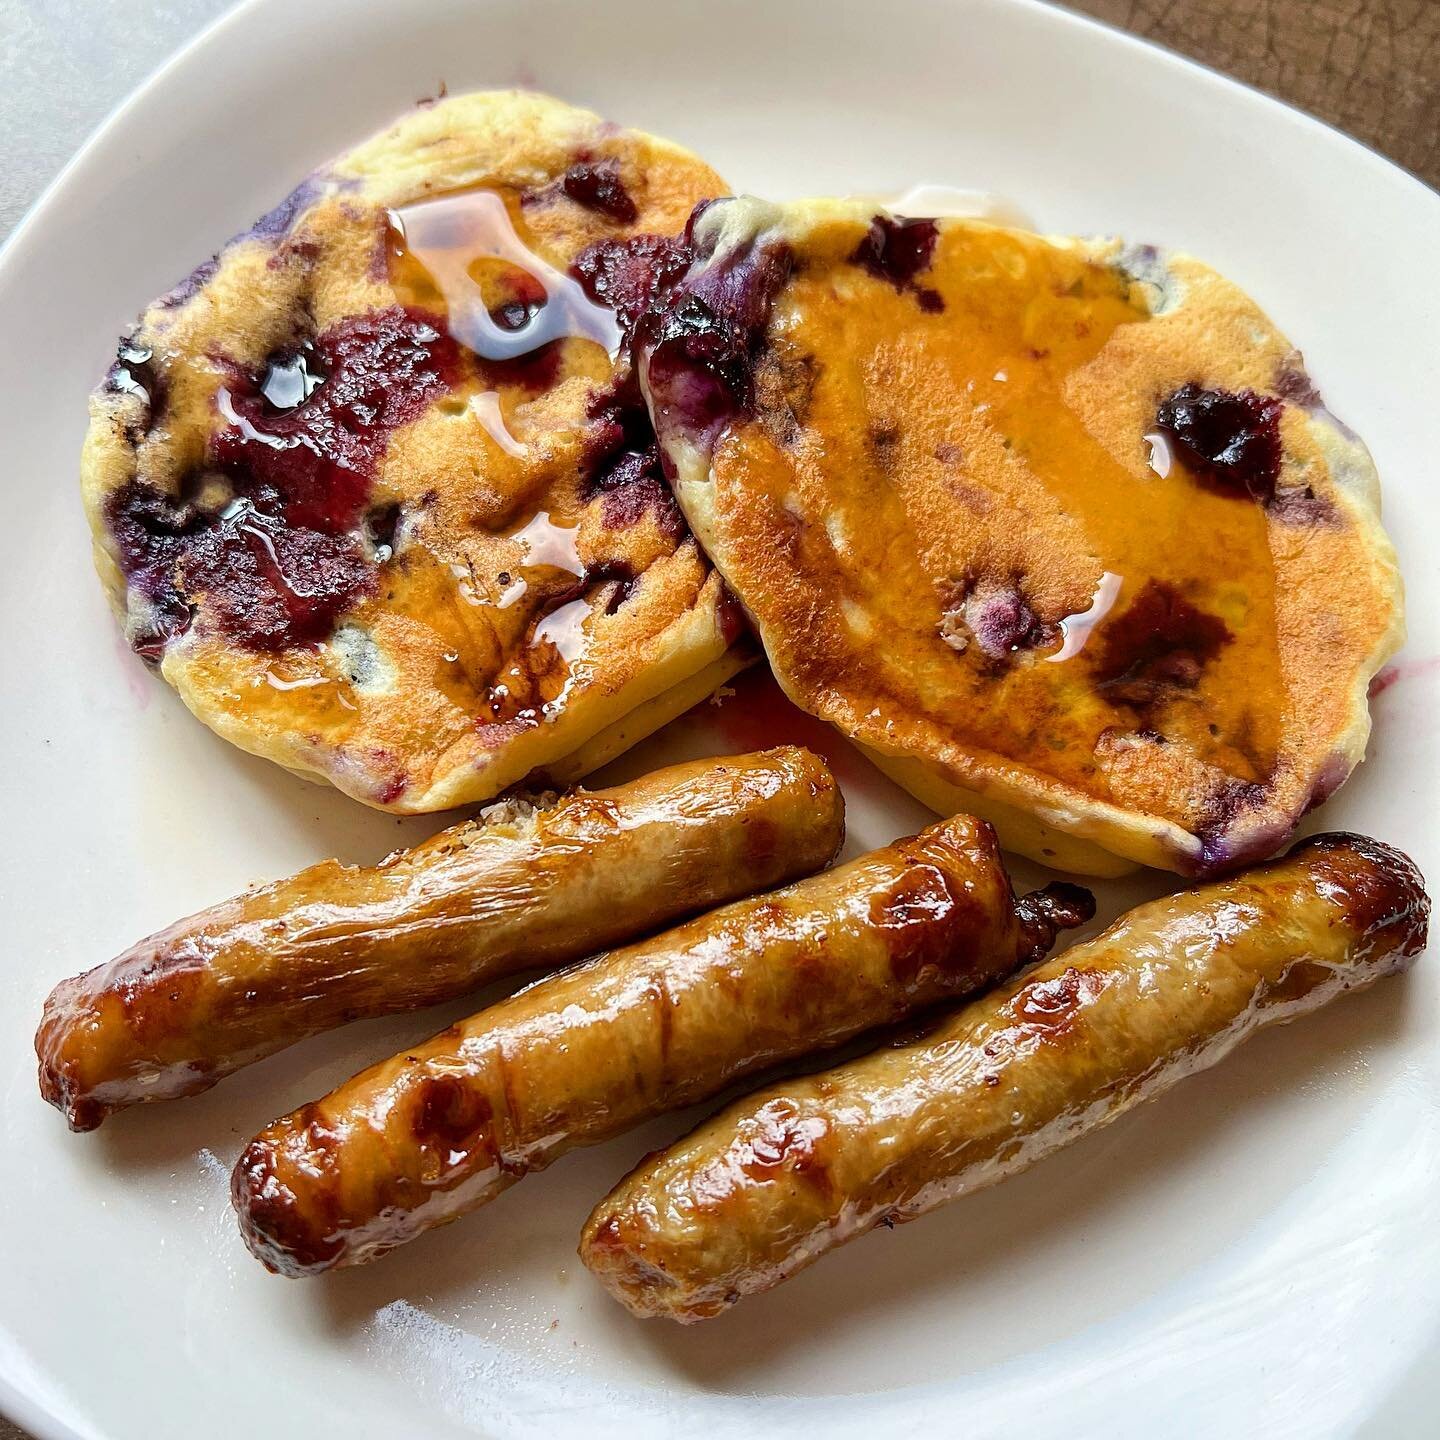 GF Banana Blueberry Protein Pancakes 🥞
The secret ingredient is&hellip; blended 1% cottage cheese! Thank you @coachboski for the idea! 💡 &ldquo;BirchBenders&rdquo; brand of Gluten-Free Pancake Mix tastes great and makes fluffy cakes! Served these a